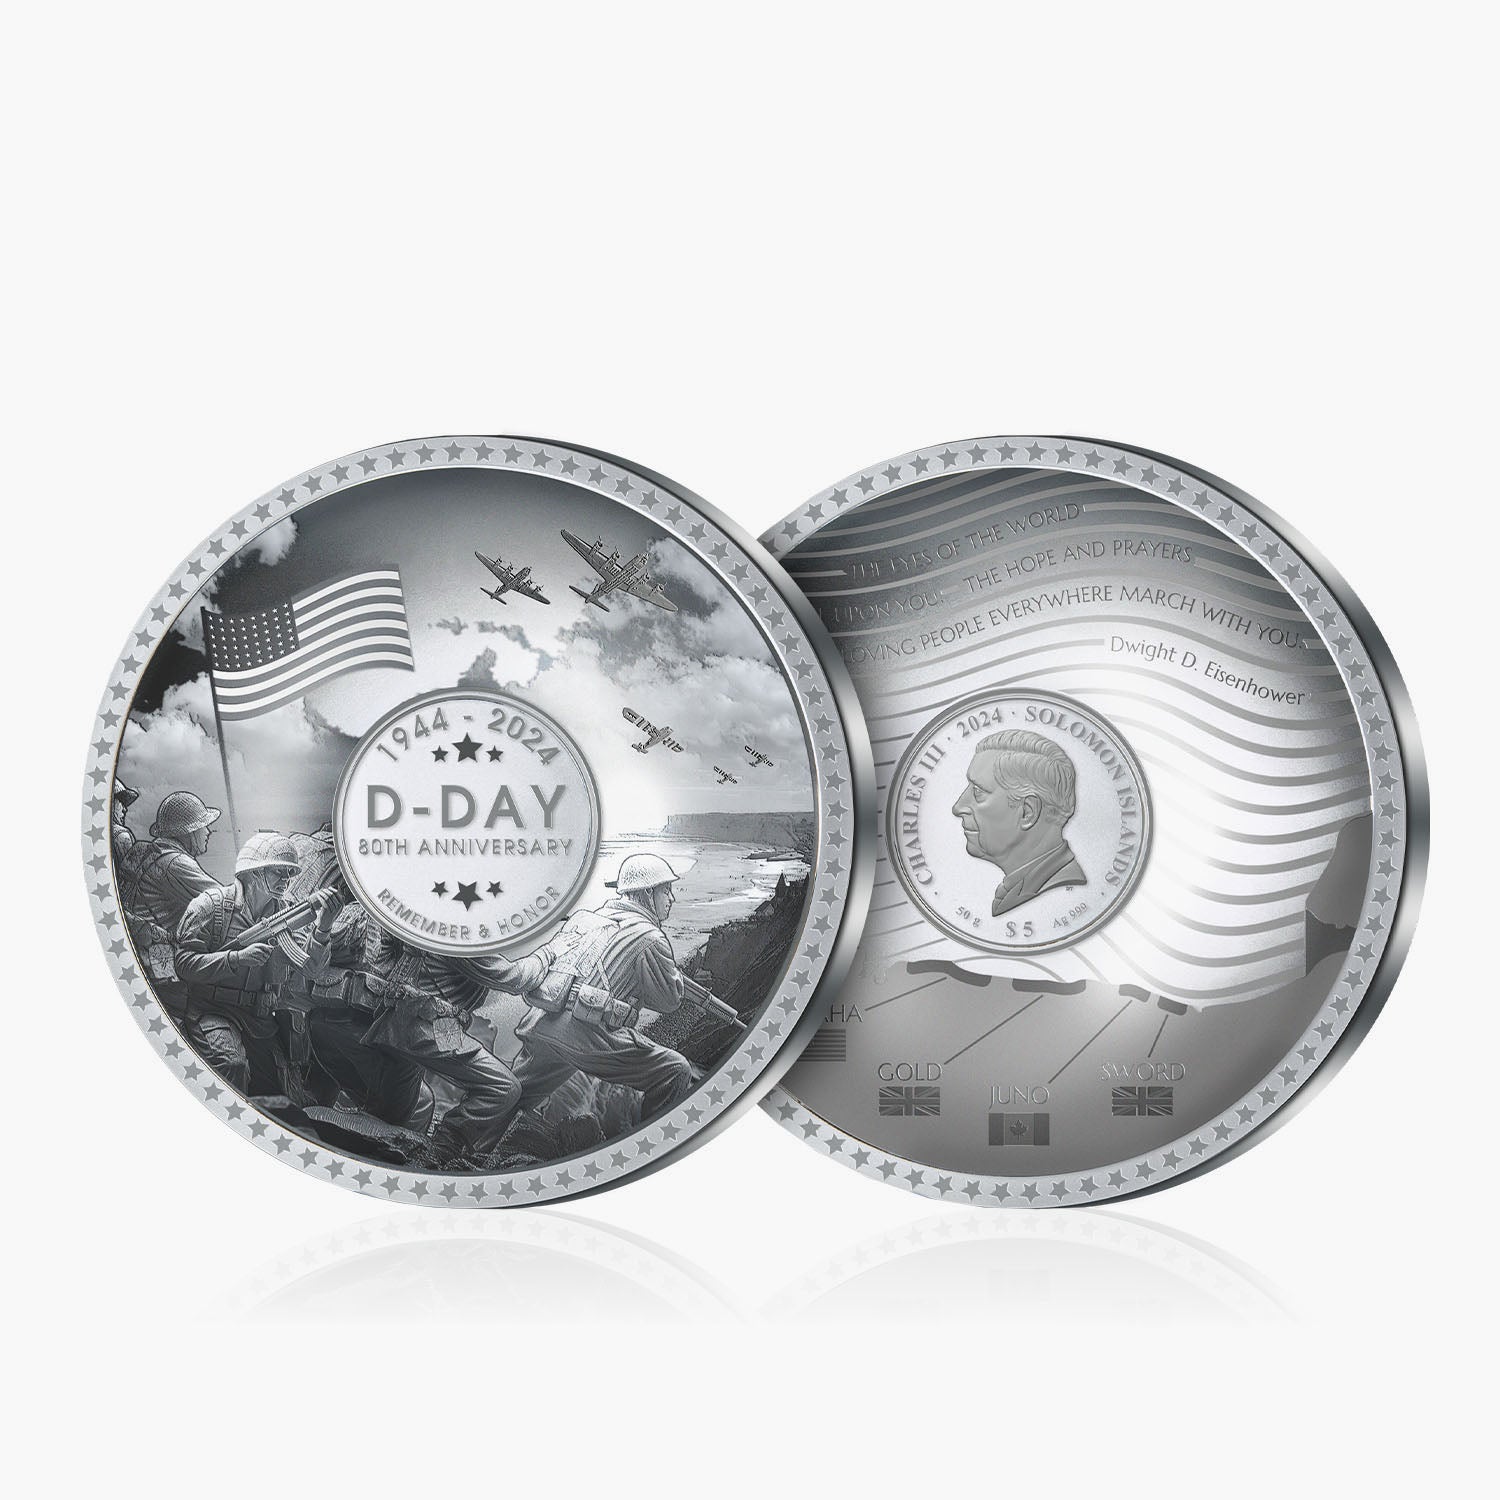 80th Anniversary of D-Day Solid Silver coin